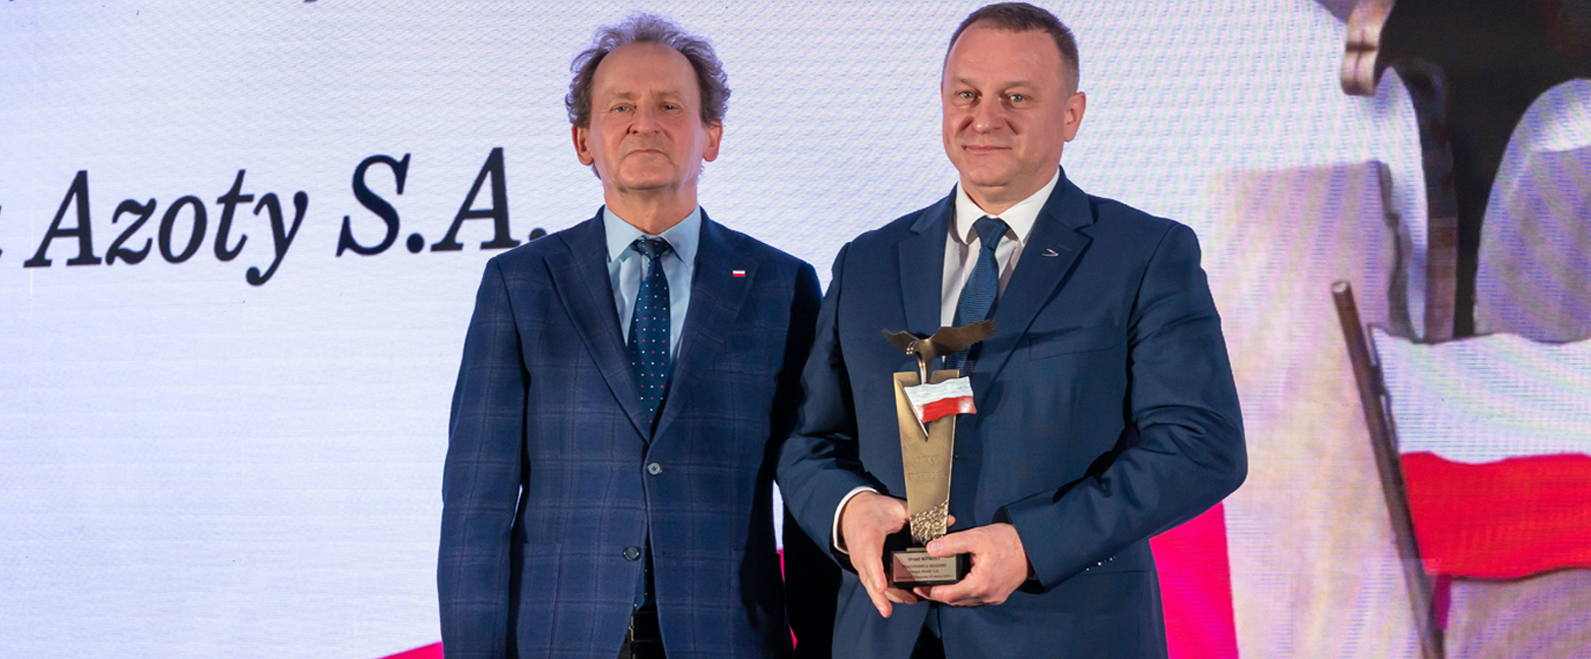 Grupa Azoty S.A. awarded as Employer of the Region at Wprost Eagles Gala